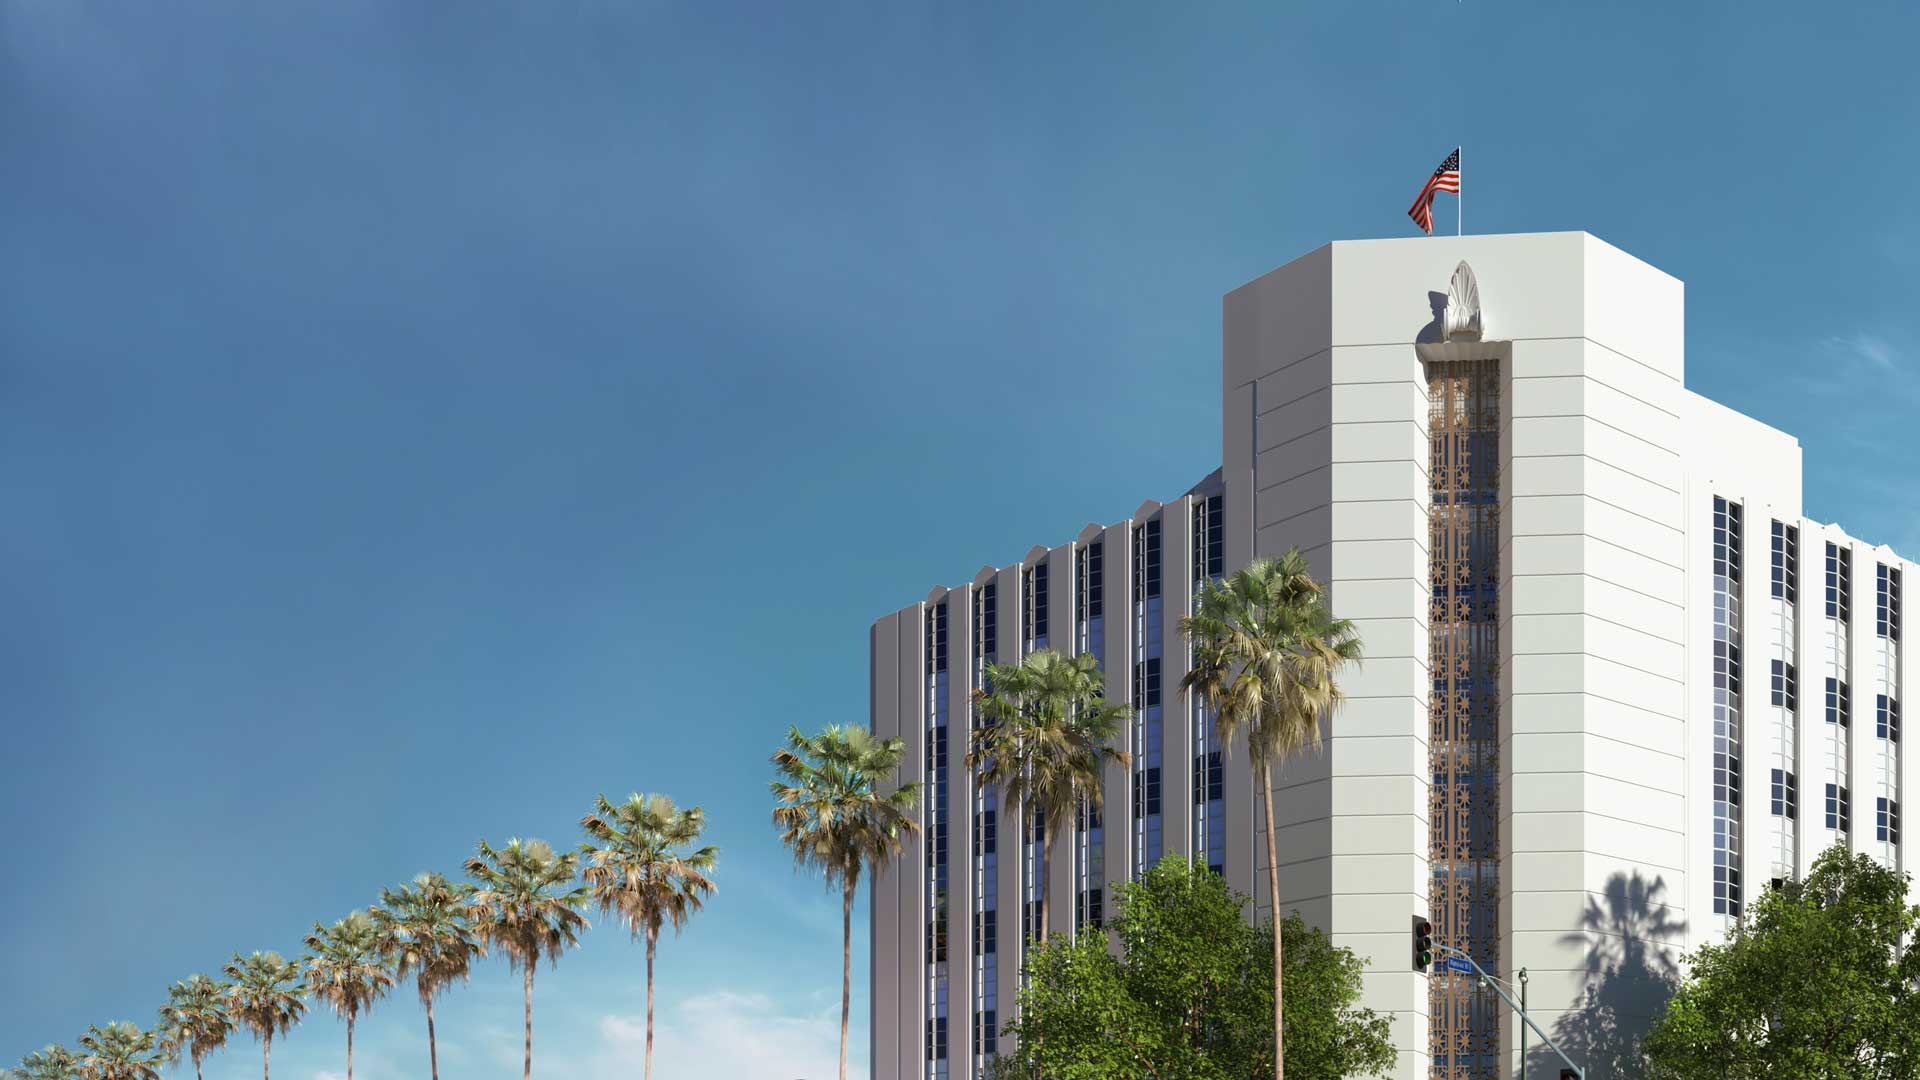 Front of Wilshire Mullen building with row of palm trees and blue sky